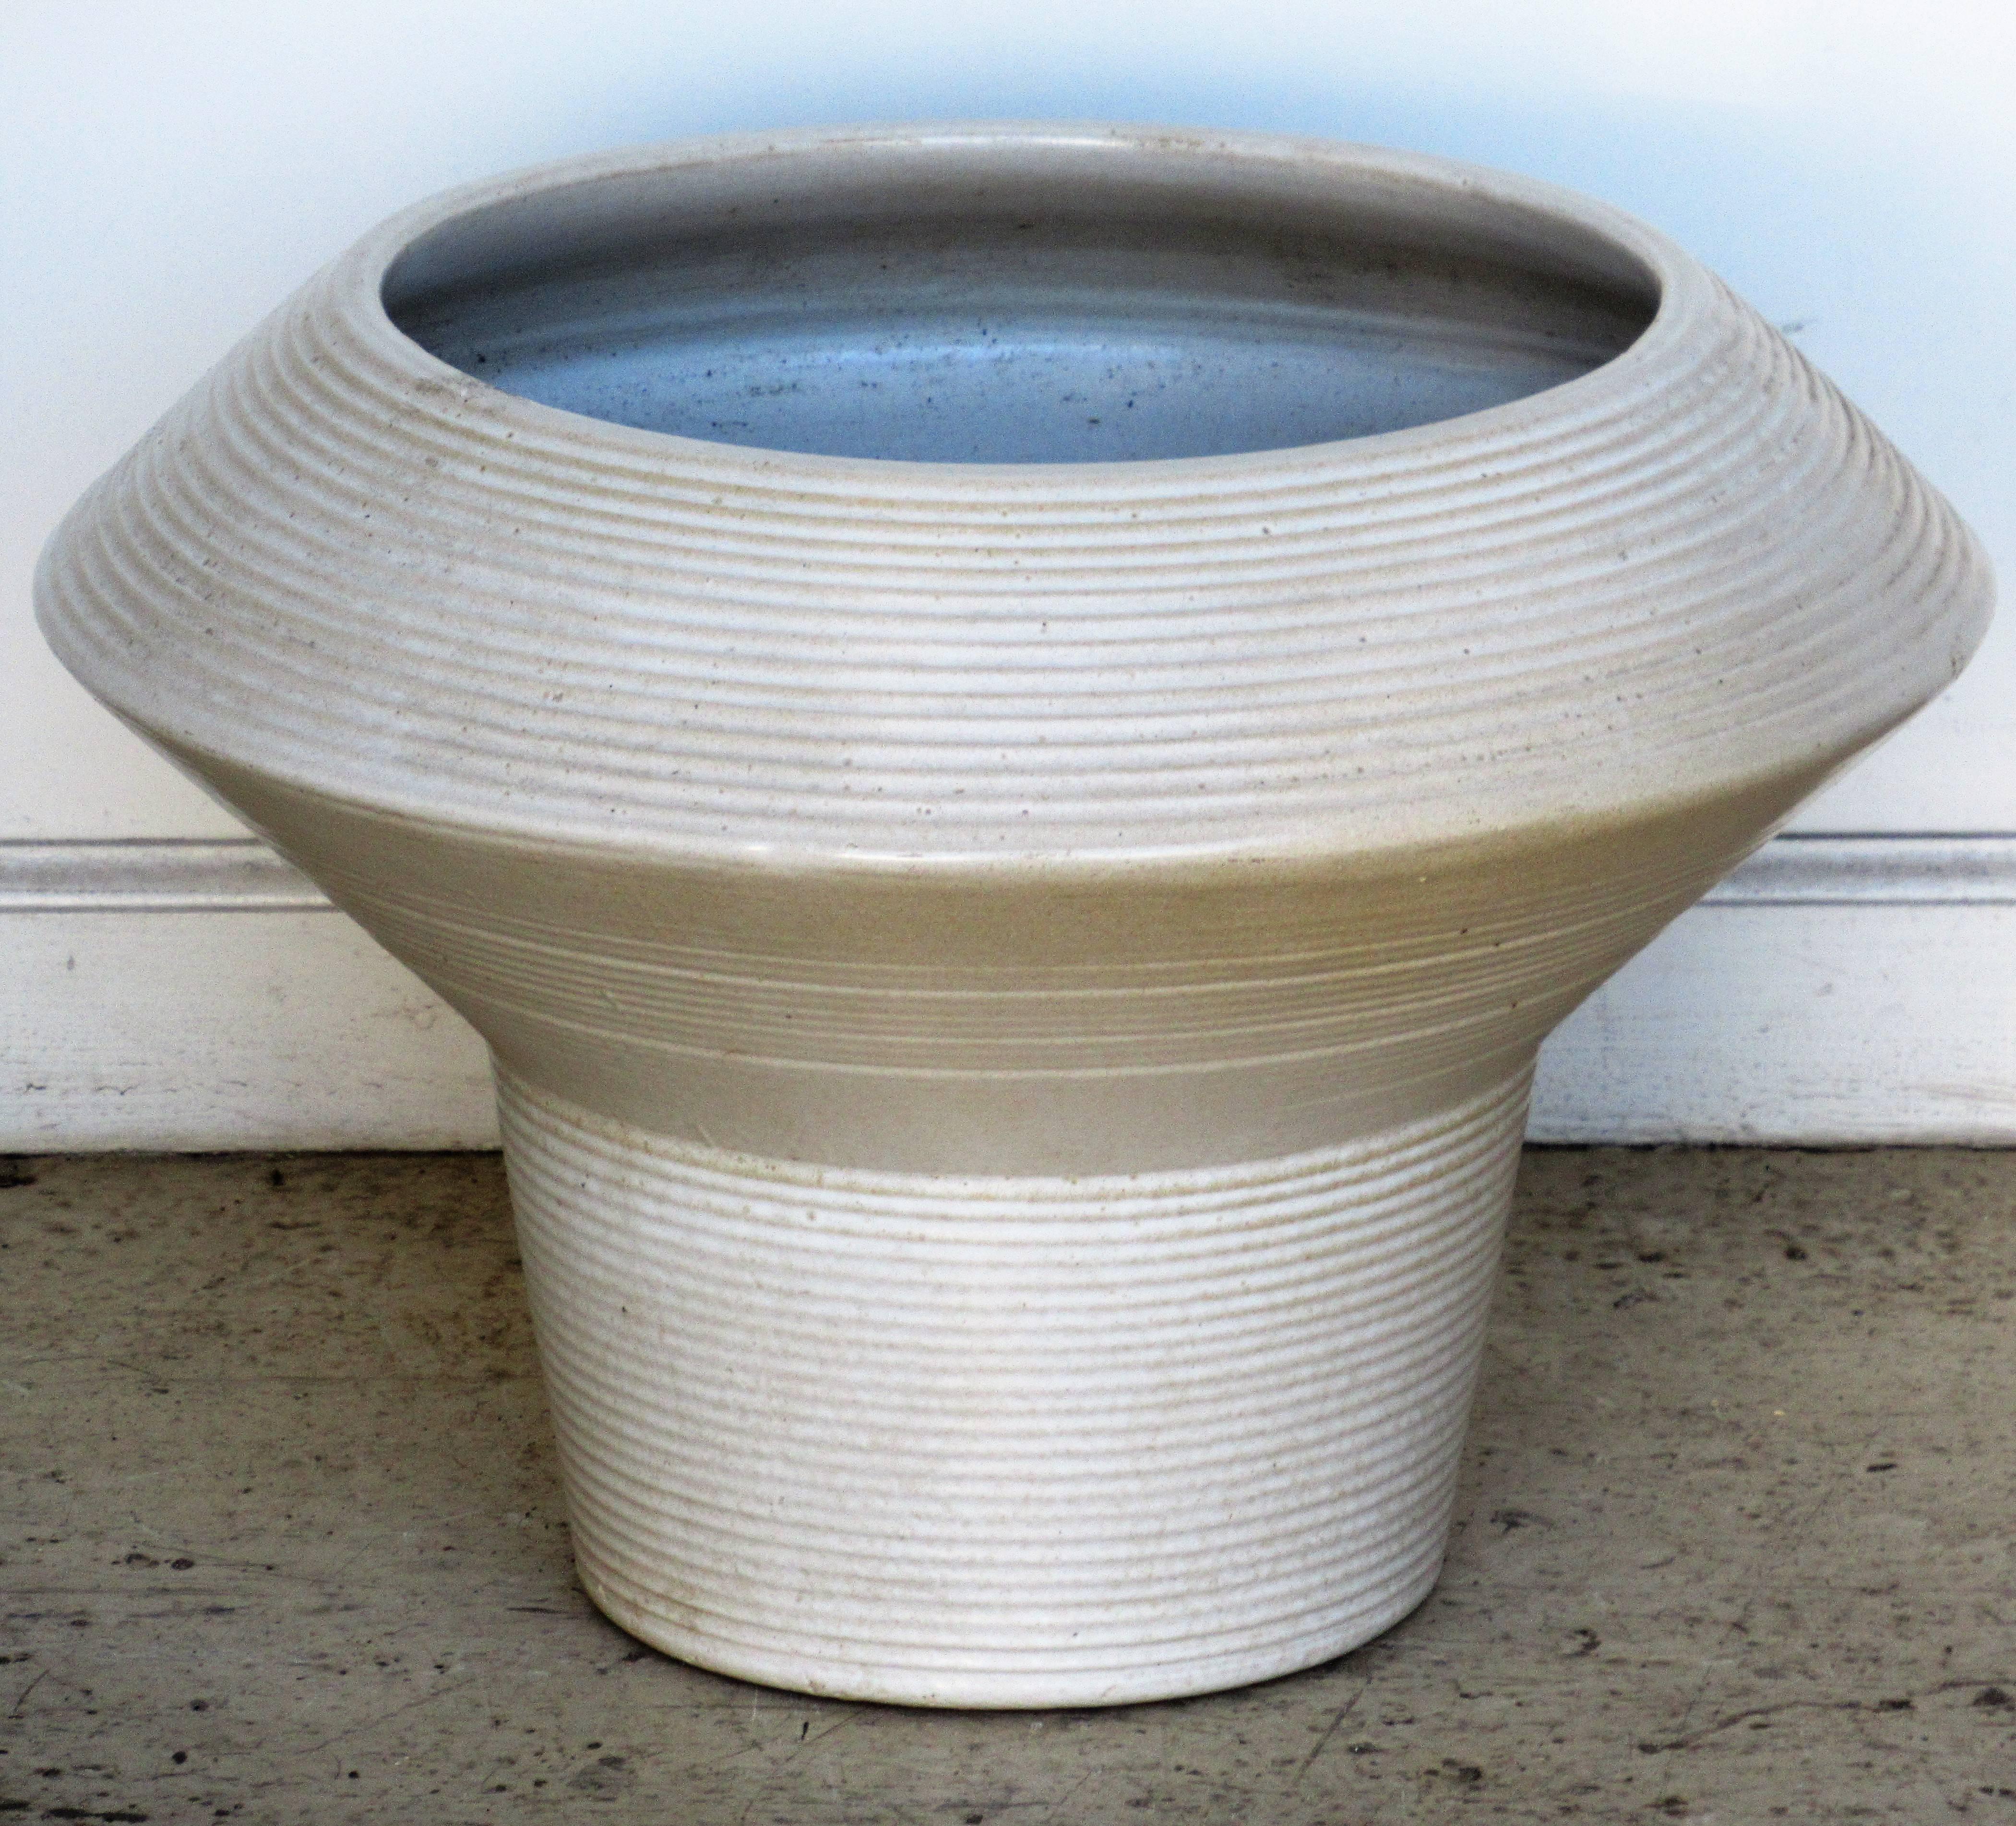 A very large sculptural modernist architectural pottery floor vase jardiniere planter with an all-over exterior ribbed design and a medium gloss oatmeal white glaze. Attributed to Zanesville - Stoneage Modern. Circa 1960